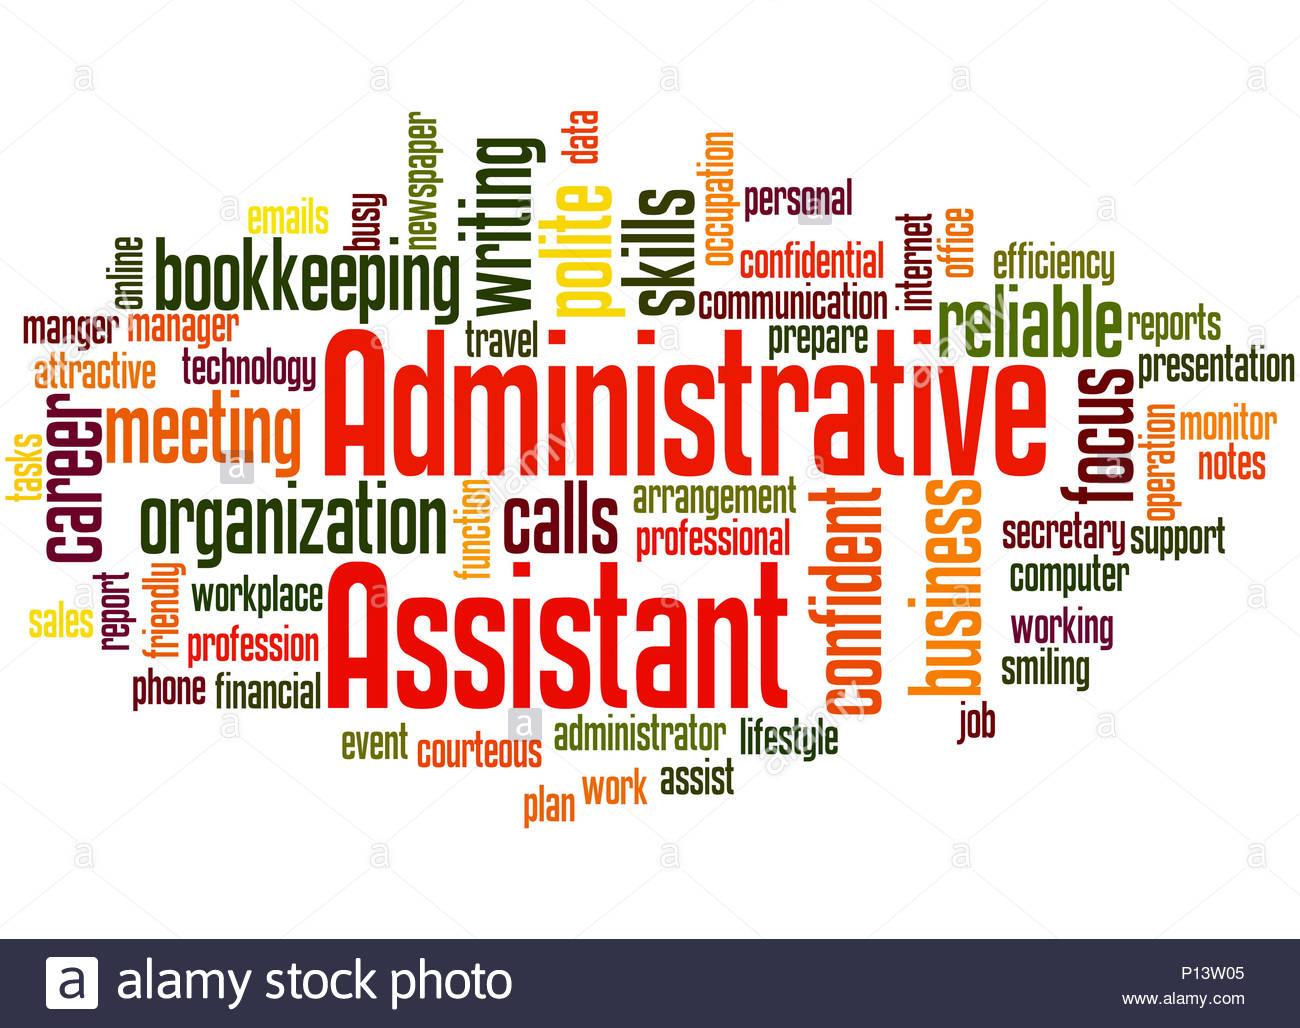 Administrative Assistant word cloud concept on white background